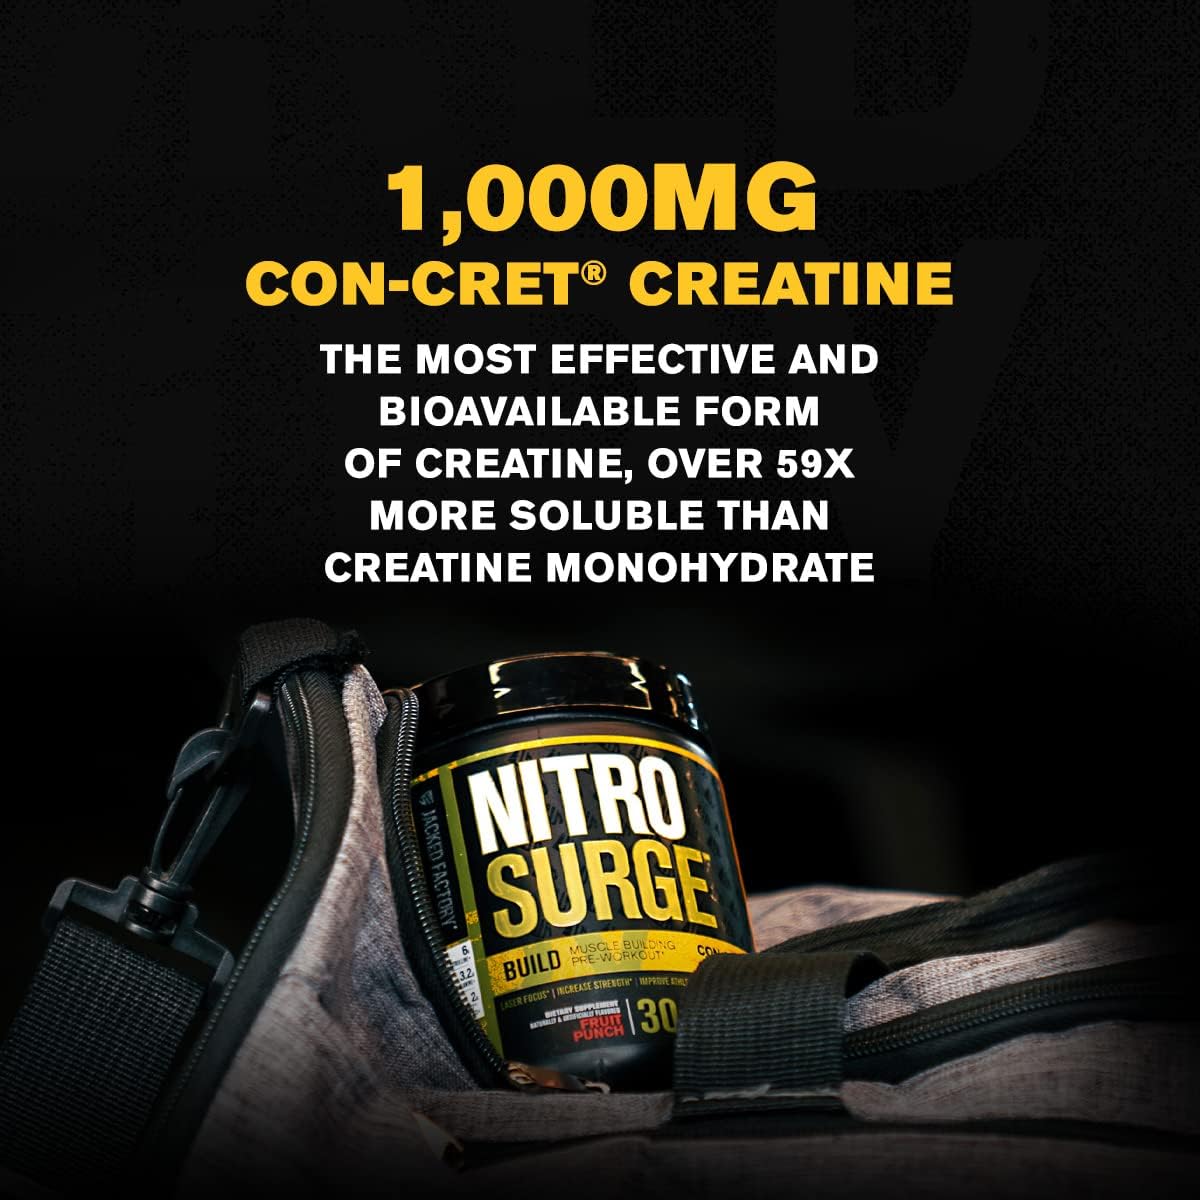 Nitrosurge Build Pre Workout with Creatine for Muscle Building - Con C